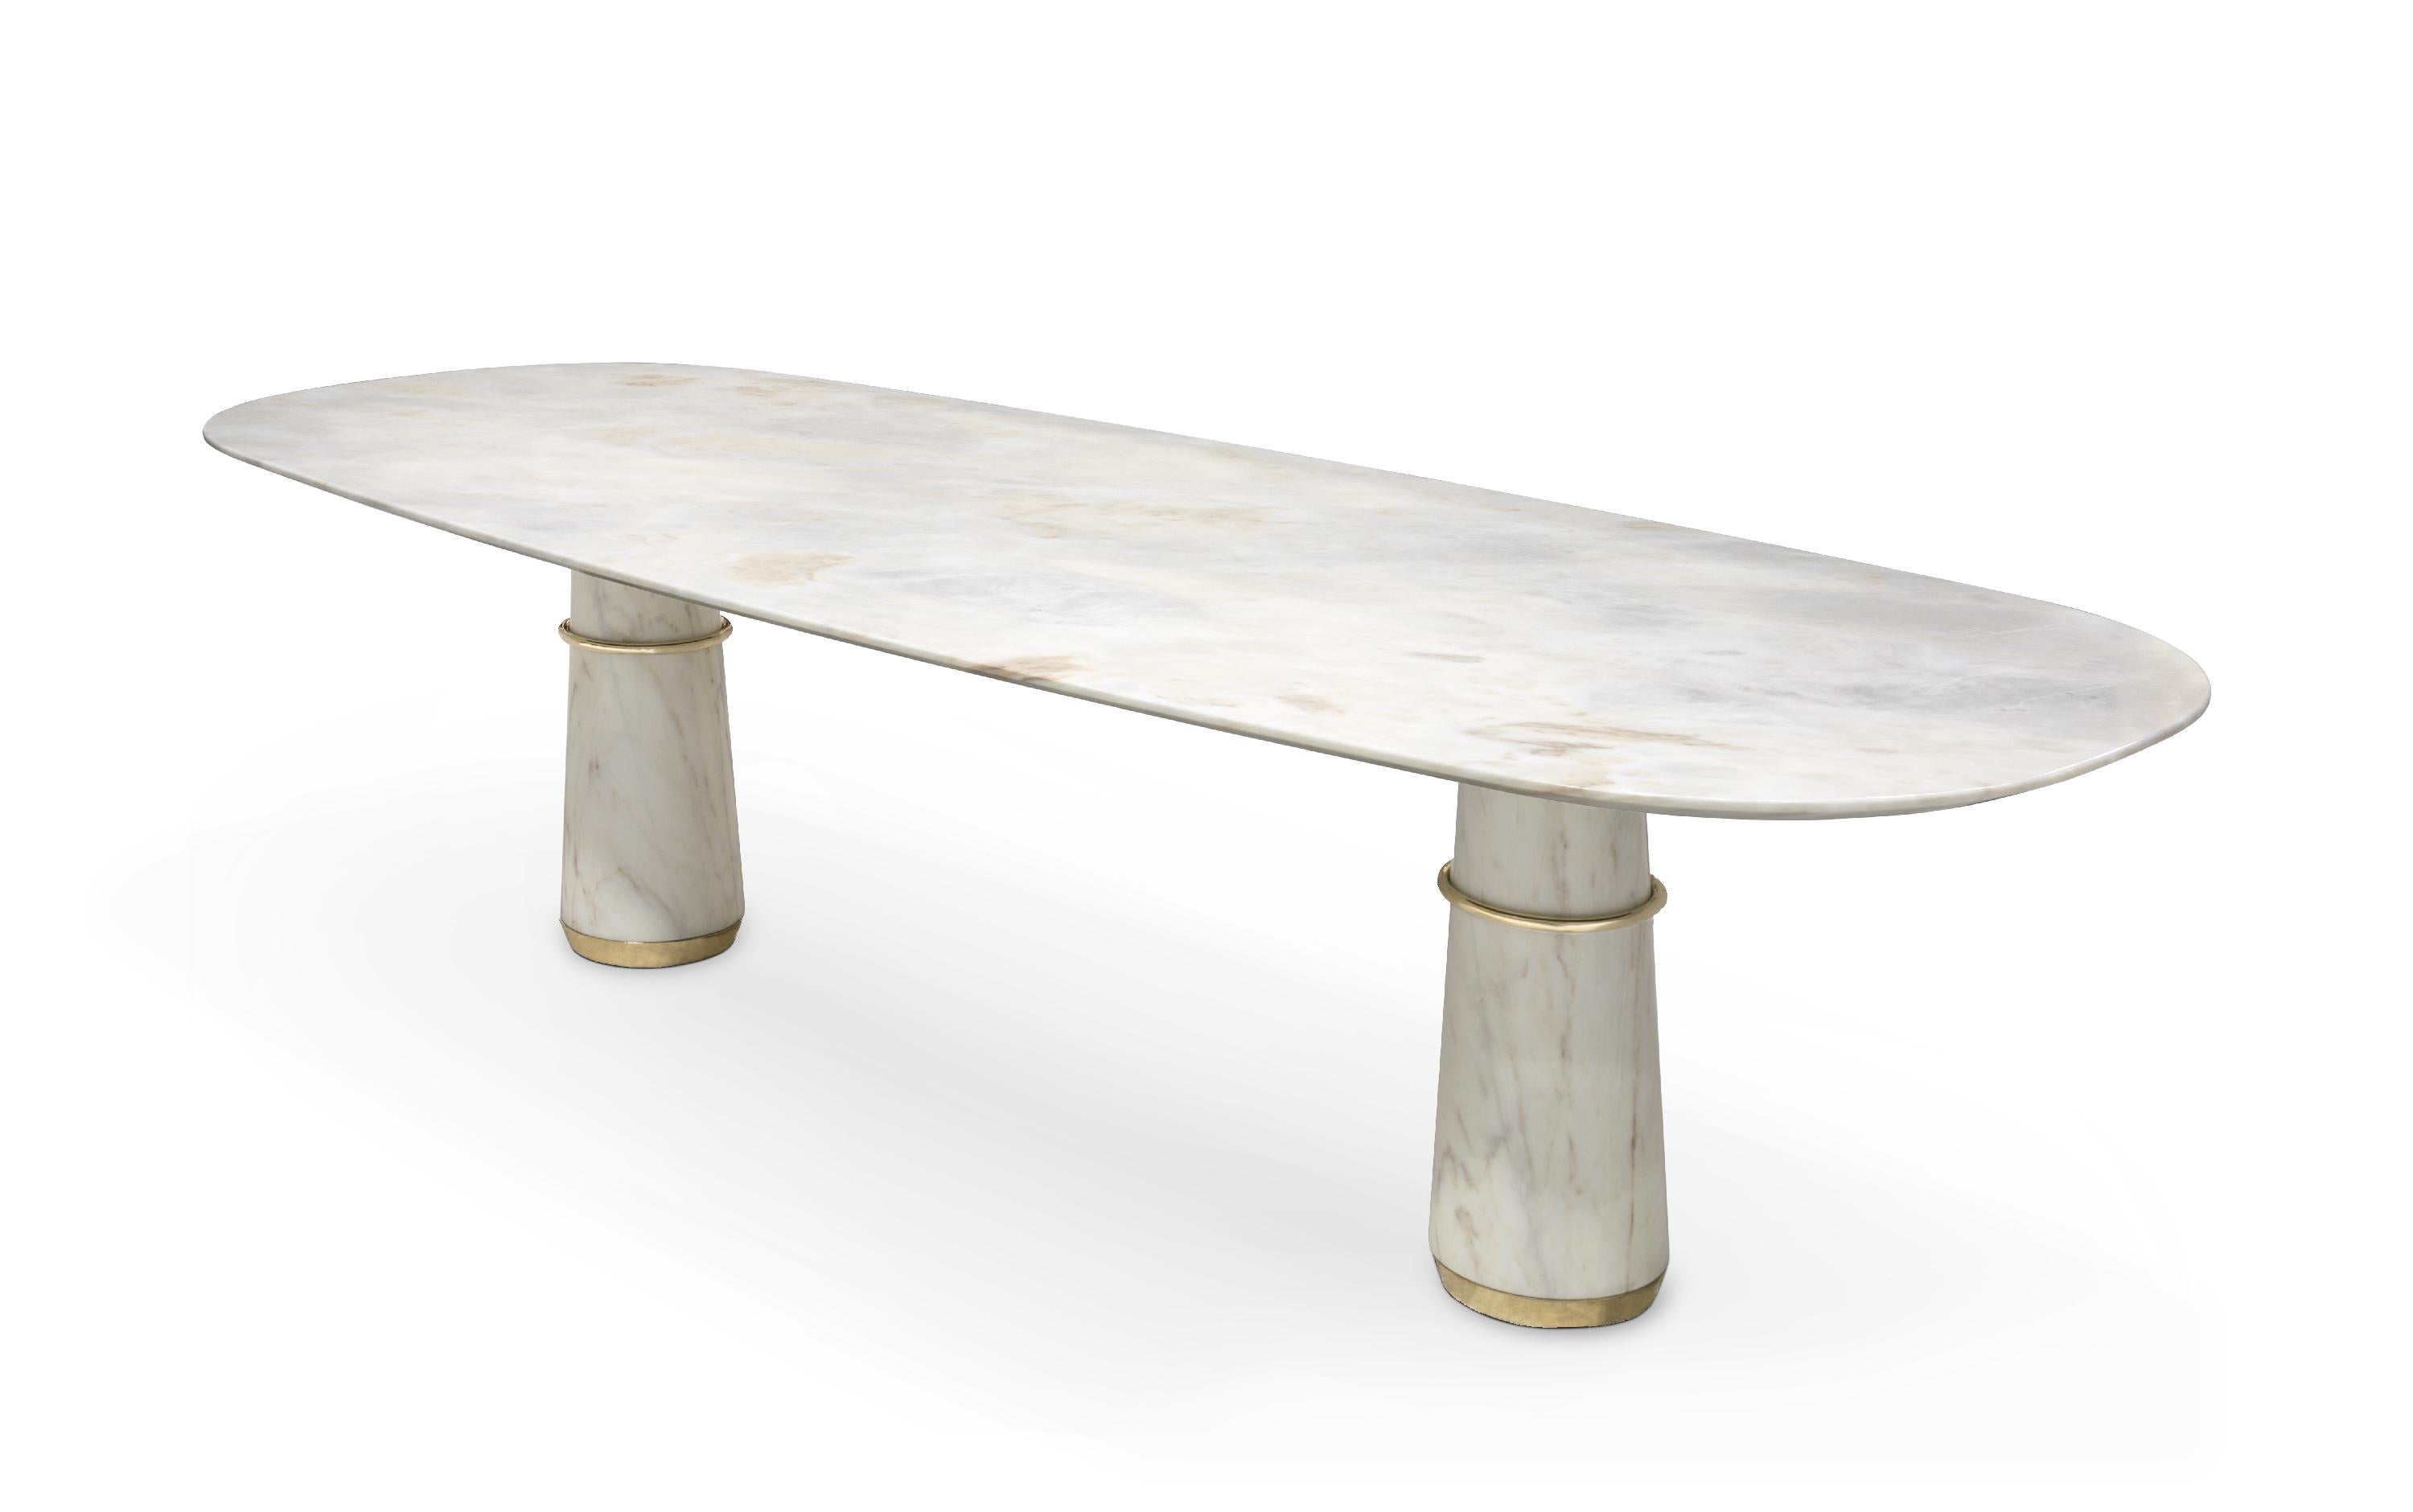 Agra is the modest setting of one the most famous and most celebrated monuments in the world, the Taj Mahal, also known as the marble mausoleum. Agra dining table II, just like Taj Mahal, is an impressive display of craftsmanship & elegance. Its